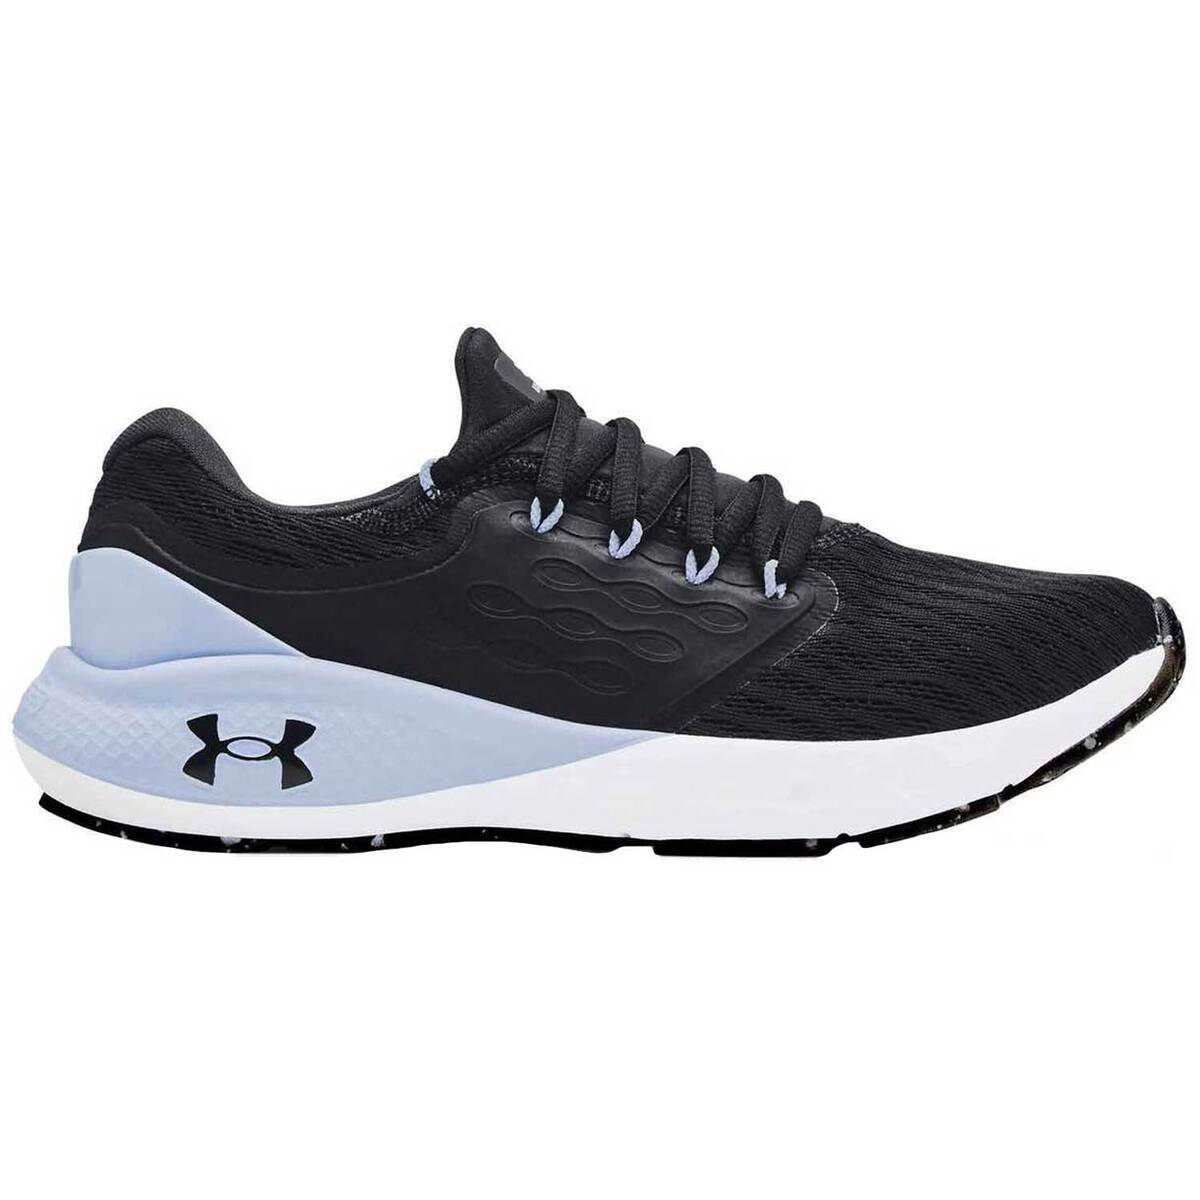 Under Armour Women's Charged Vantage Running Shoes | Sportsman's Warehouse